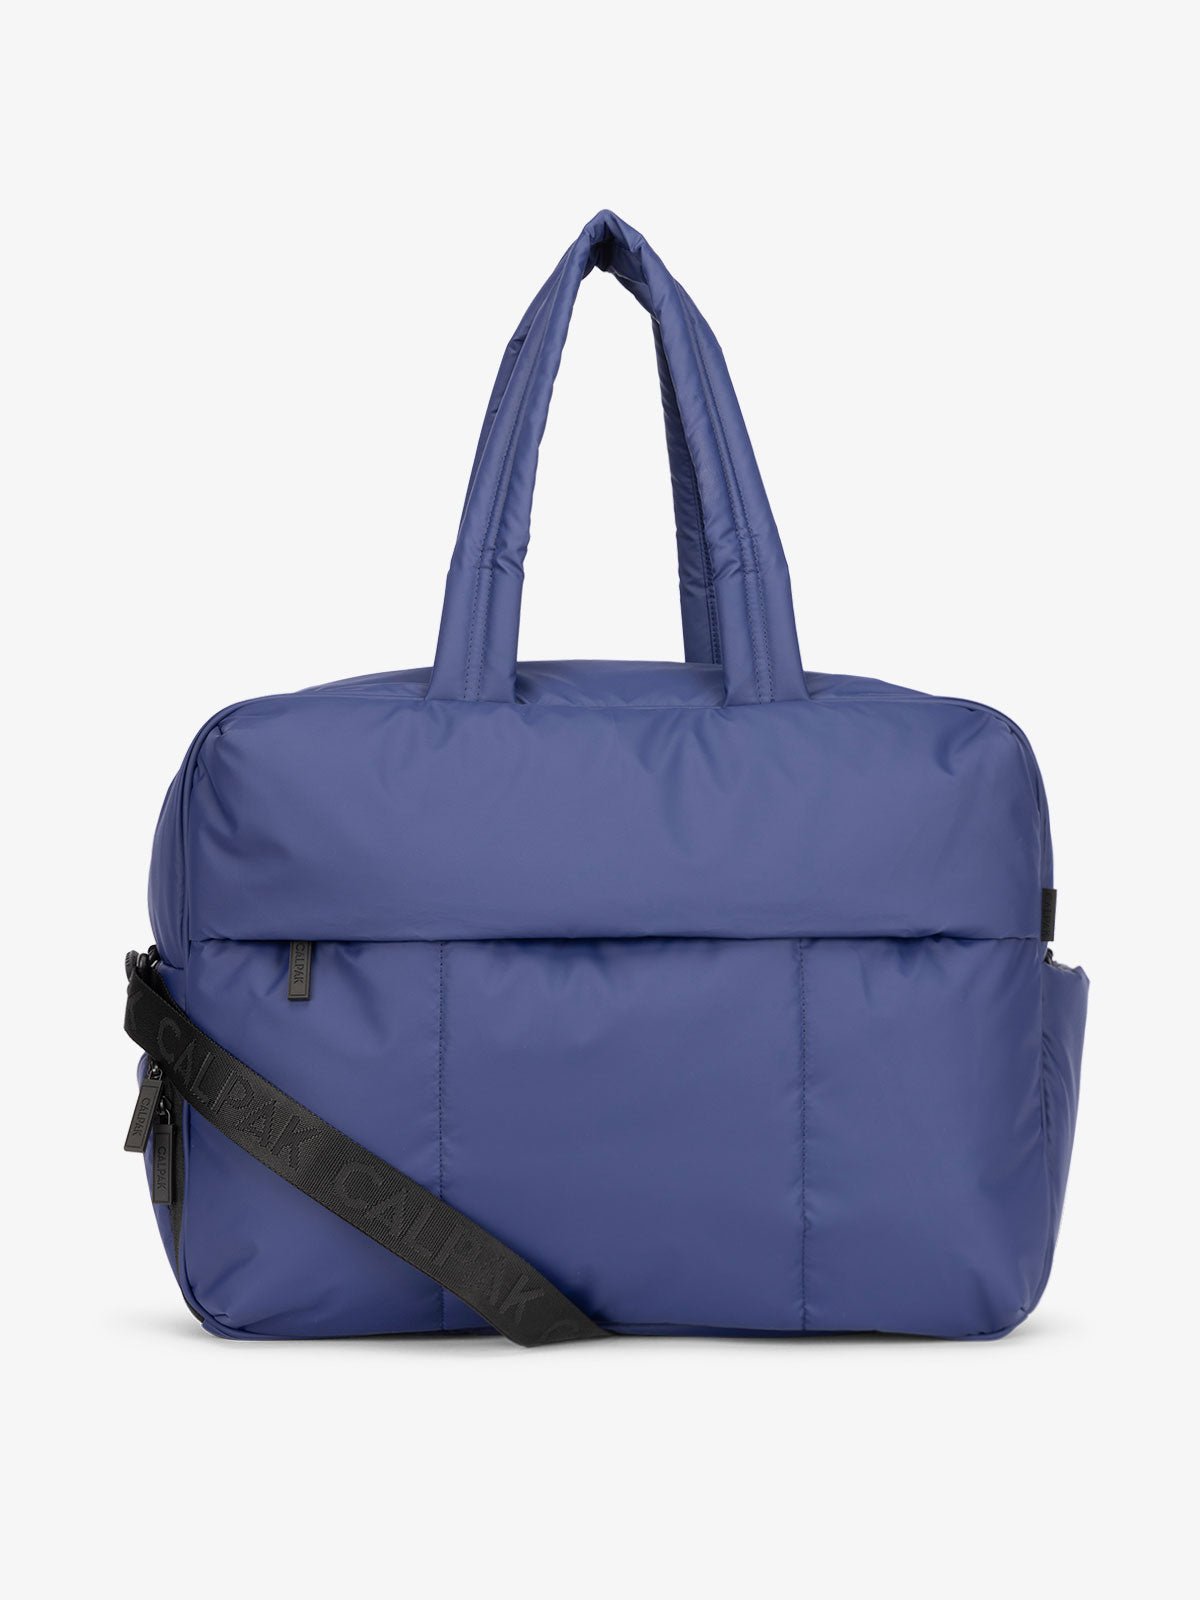 CALPAK Luka large duffle bag with detachable strap and zippered front pocket in dark blue